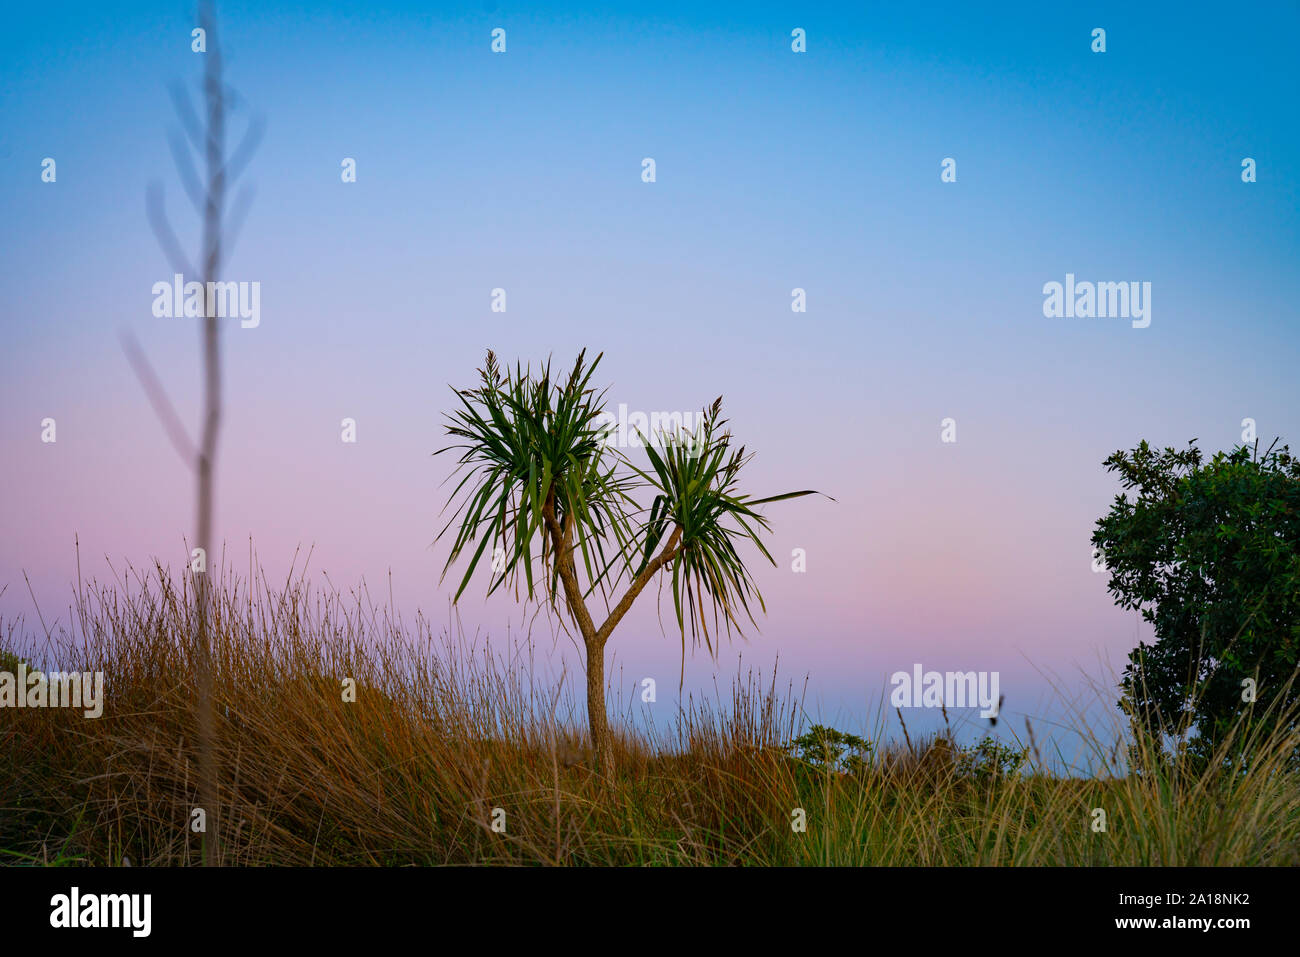 Dune landscape at dawn with three species of beach vegetation of ficina and the New Zealand cabbage tree standing out with pohutukawa tree on right  a Stock Photo